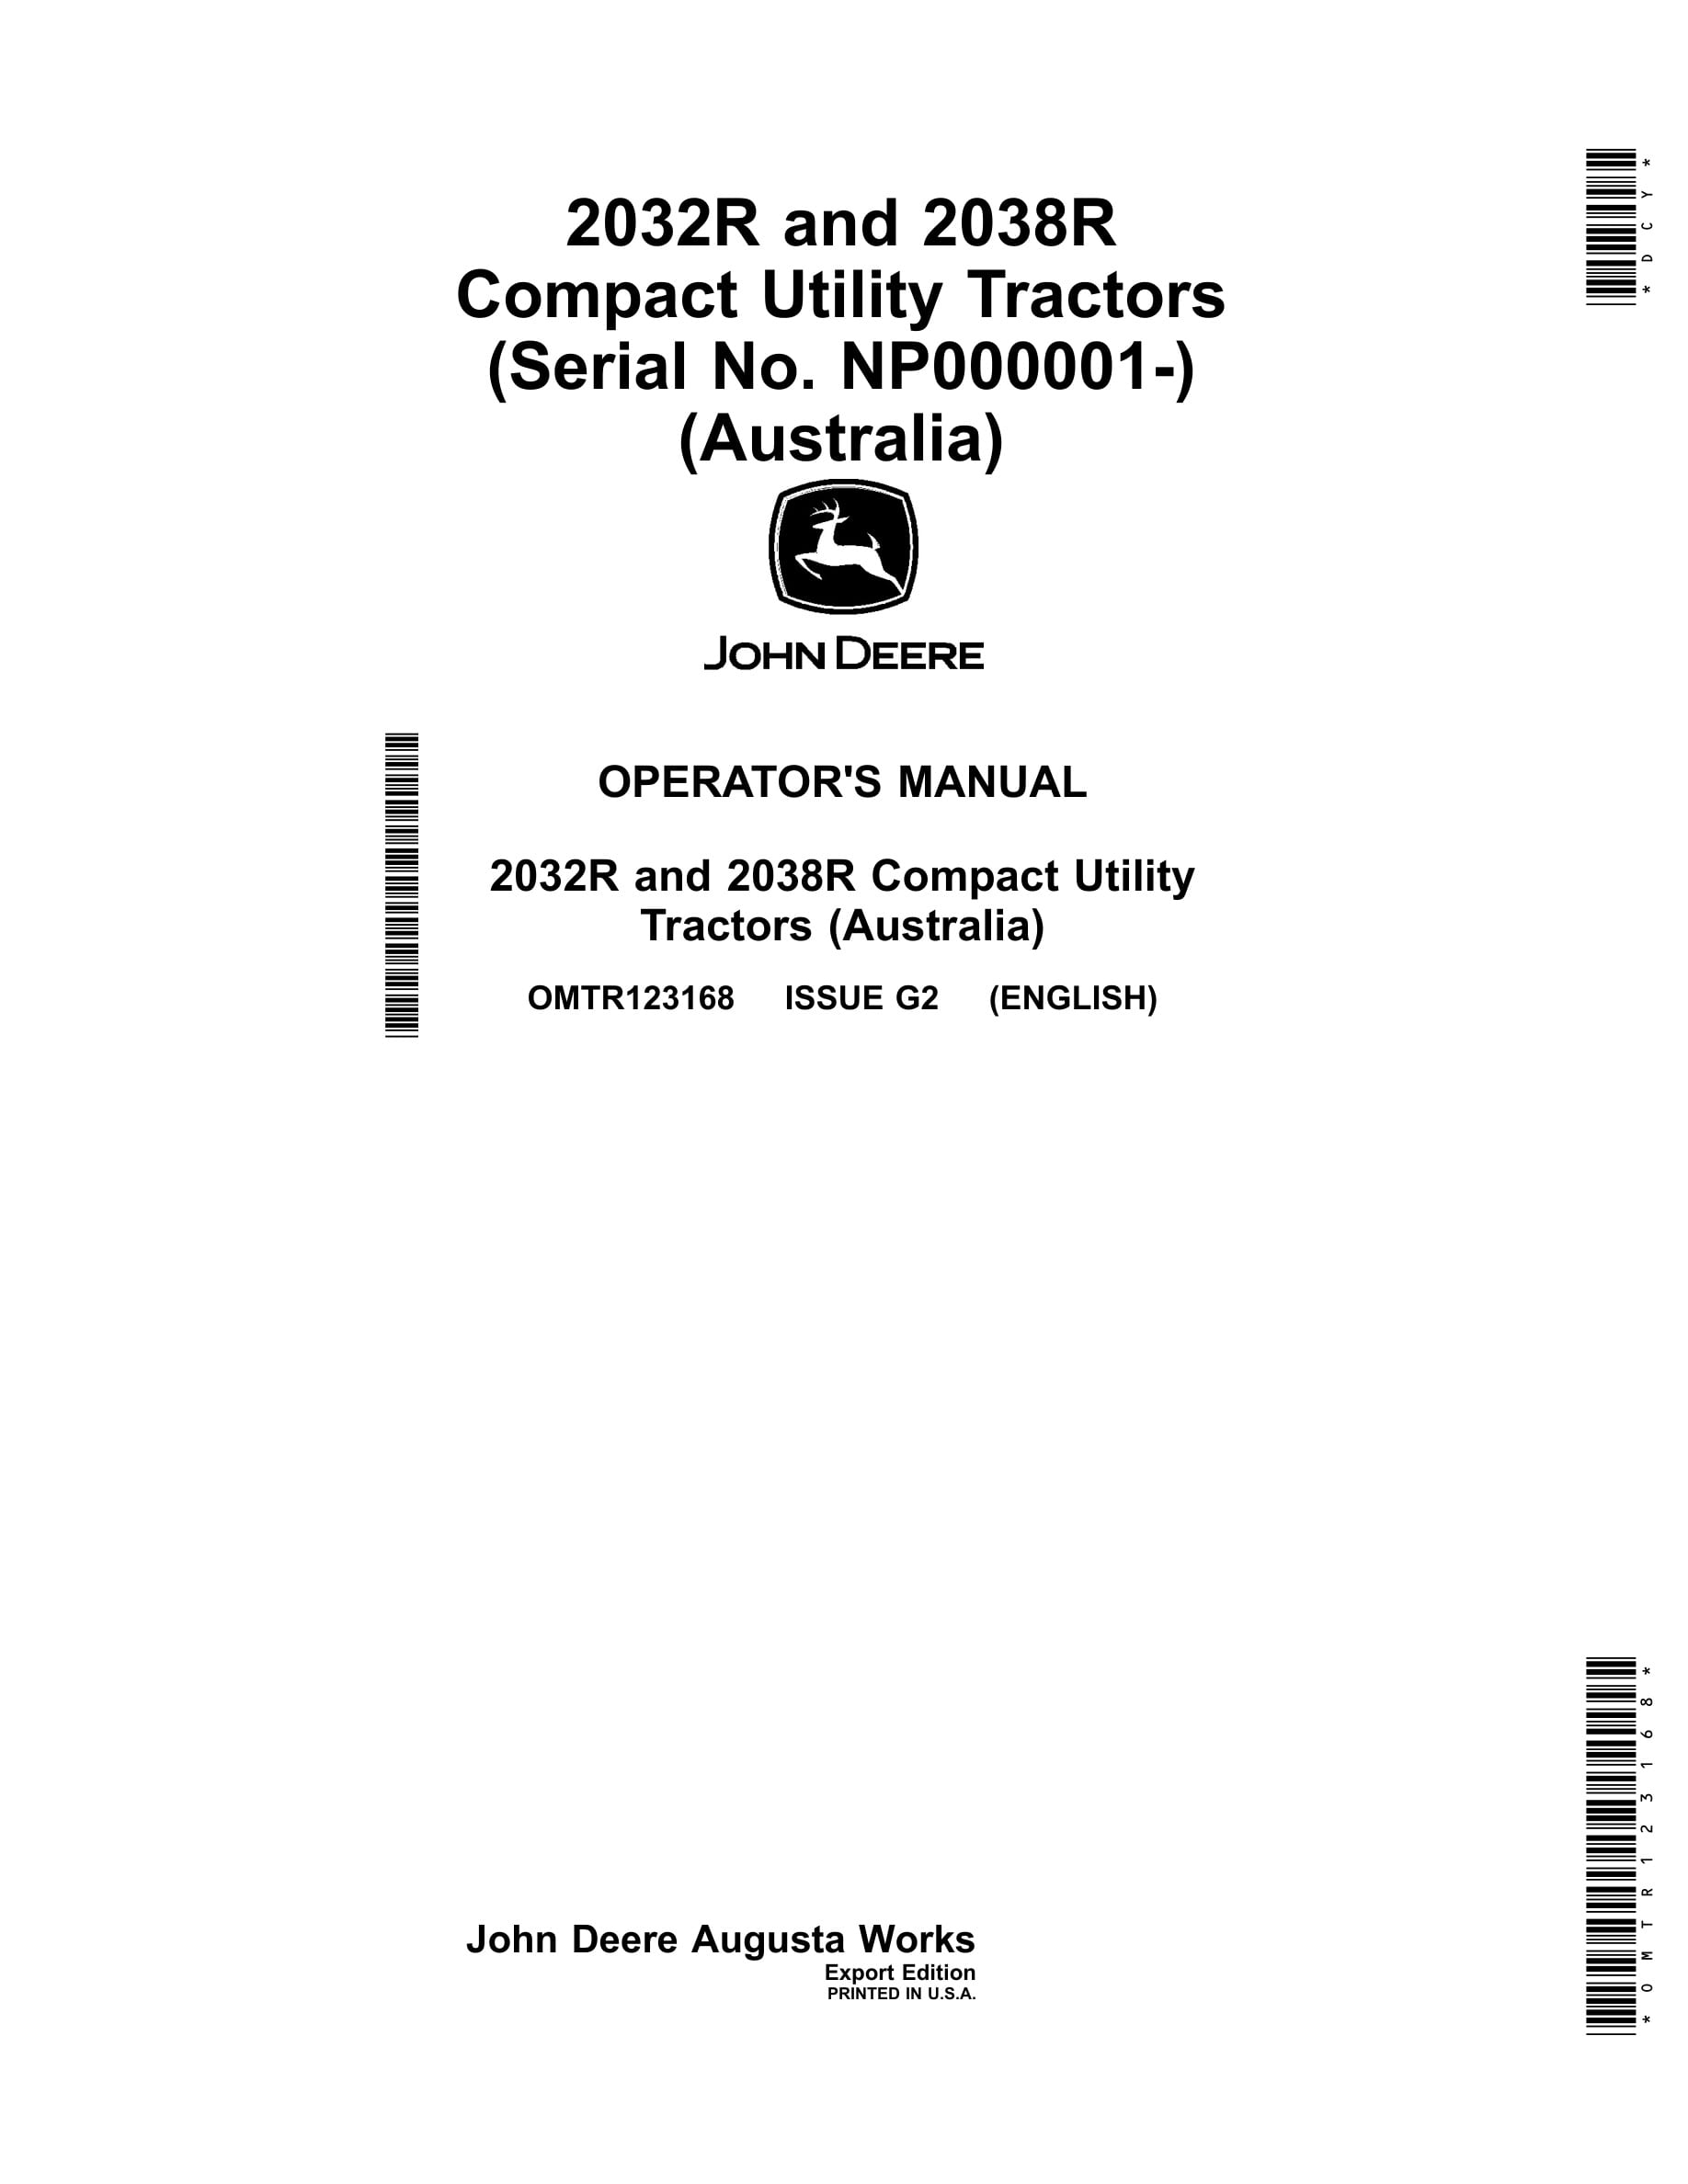 John Deere 2032r And 2038r Compact Utility Tractors Operator Manuals OMTR123168-1